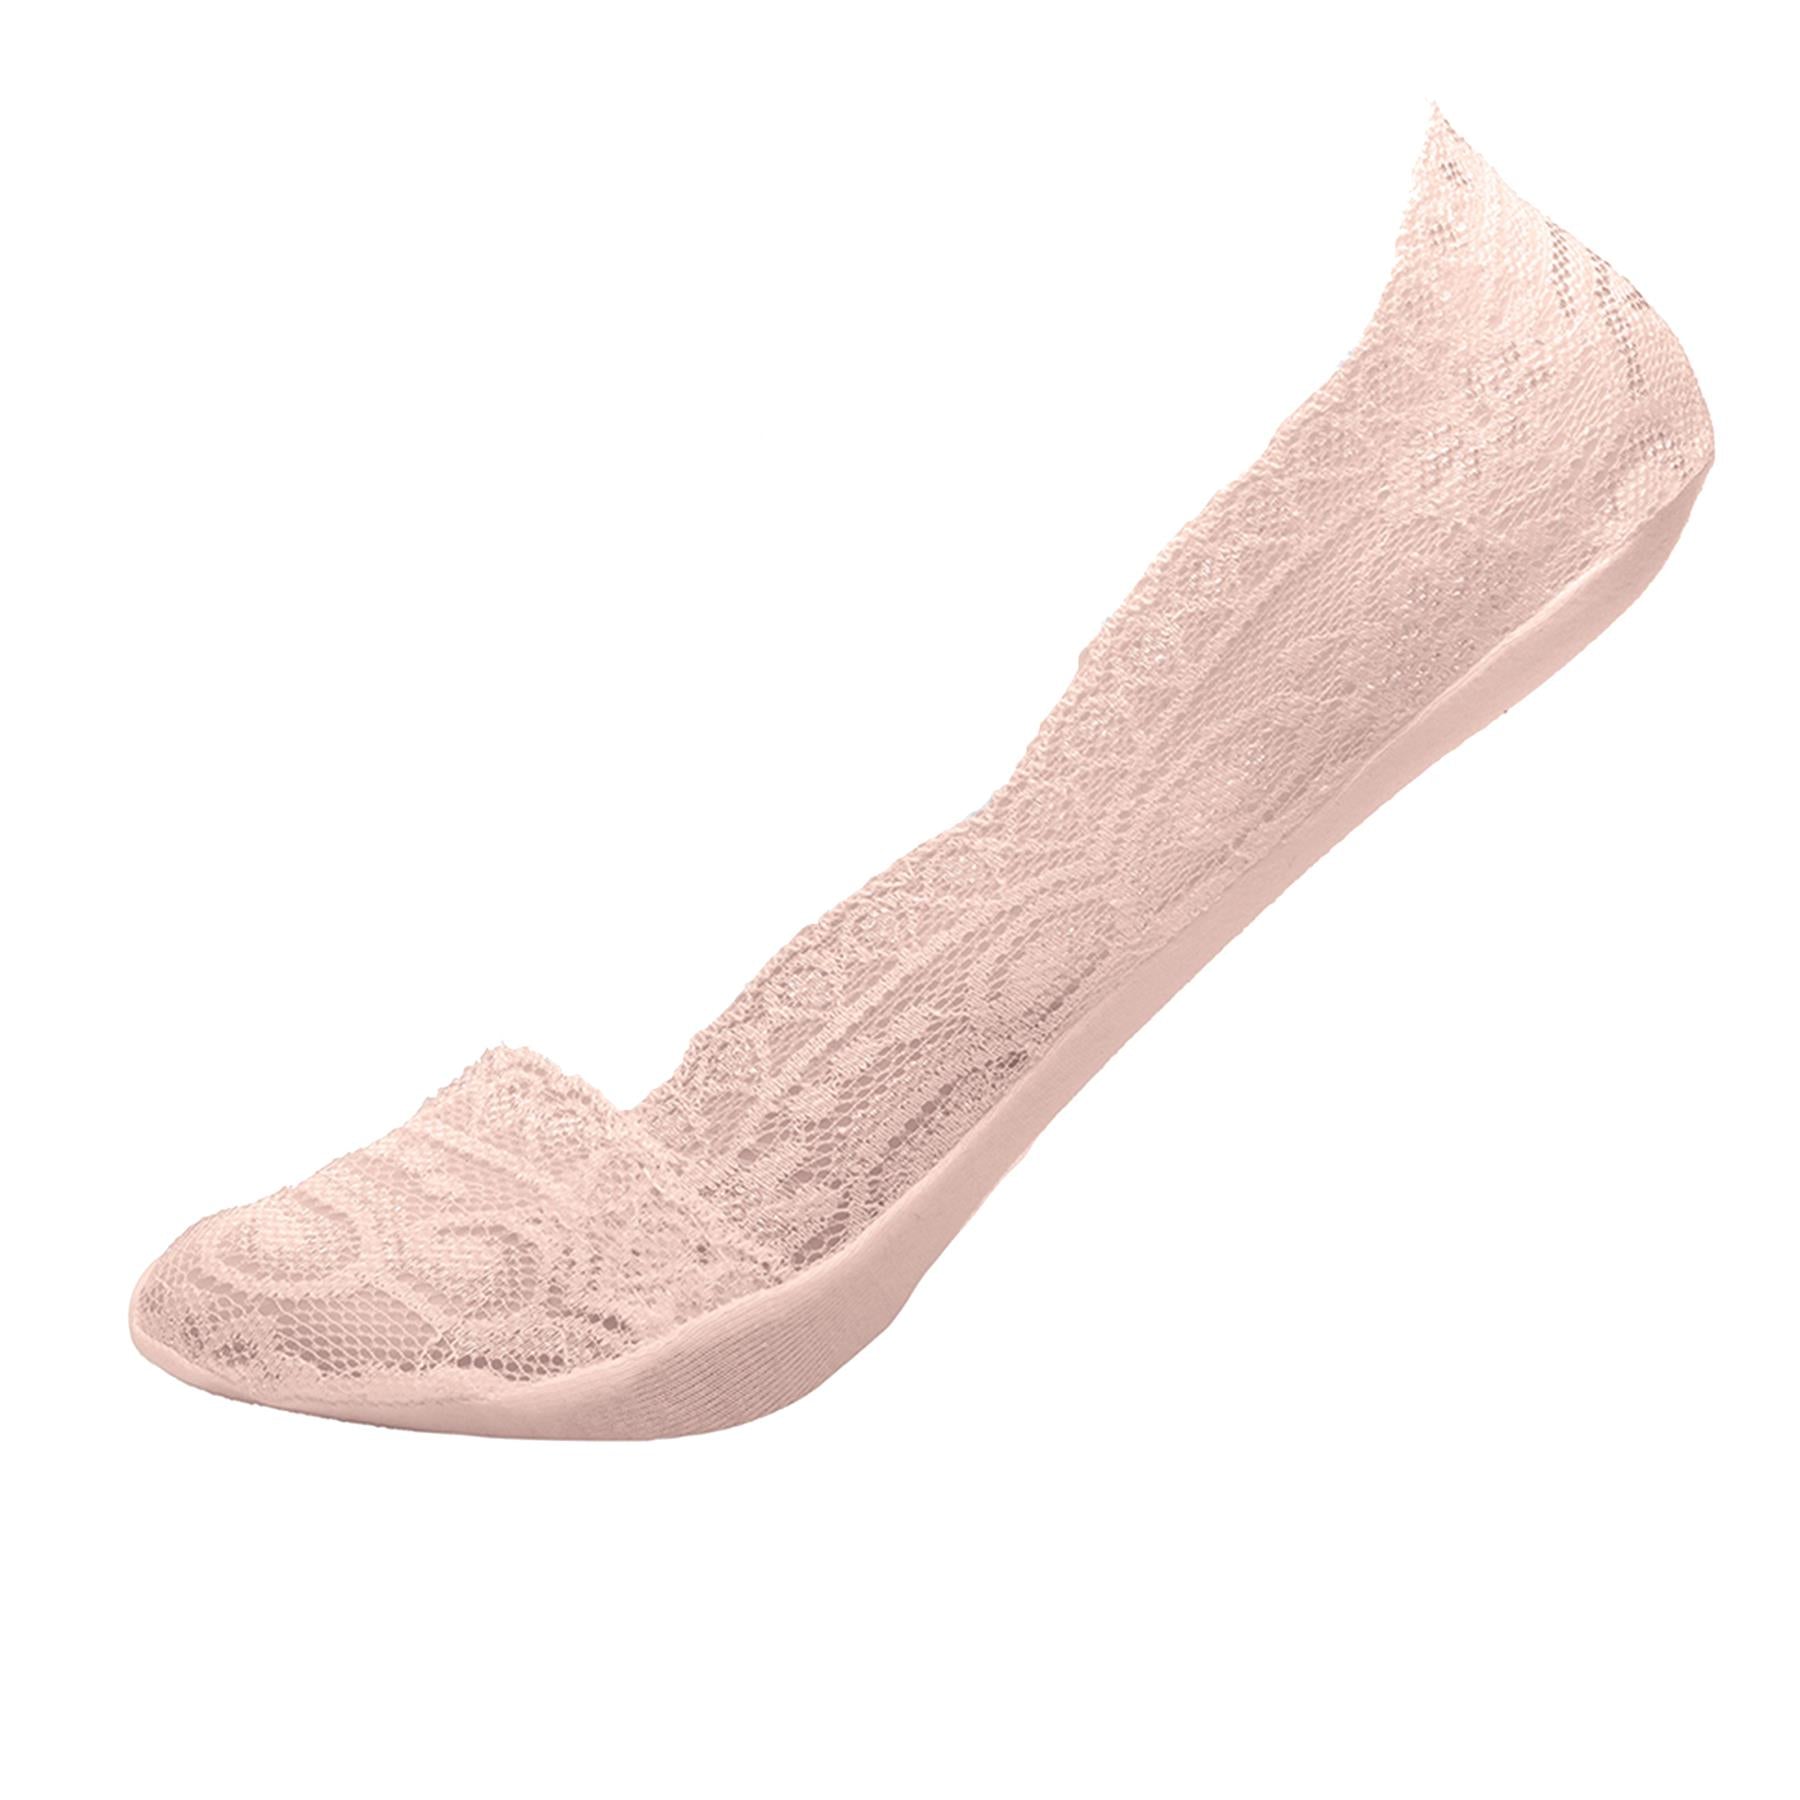 Ladies Anti Slip Skin Invisible Shoe Liners Low Cut Cotton Pack of 2 Lace Socks